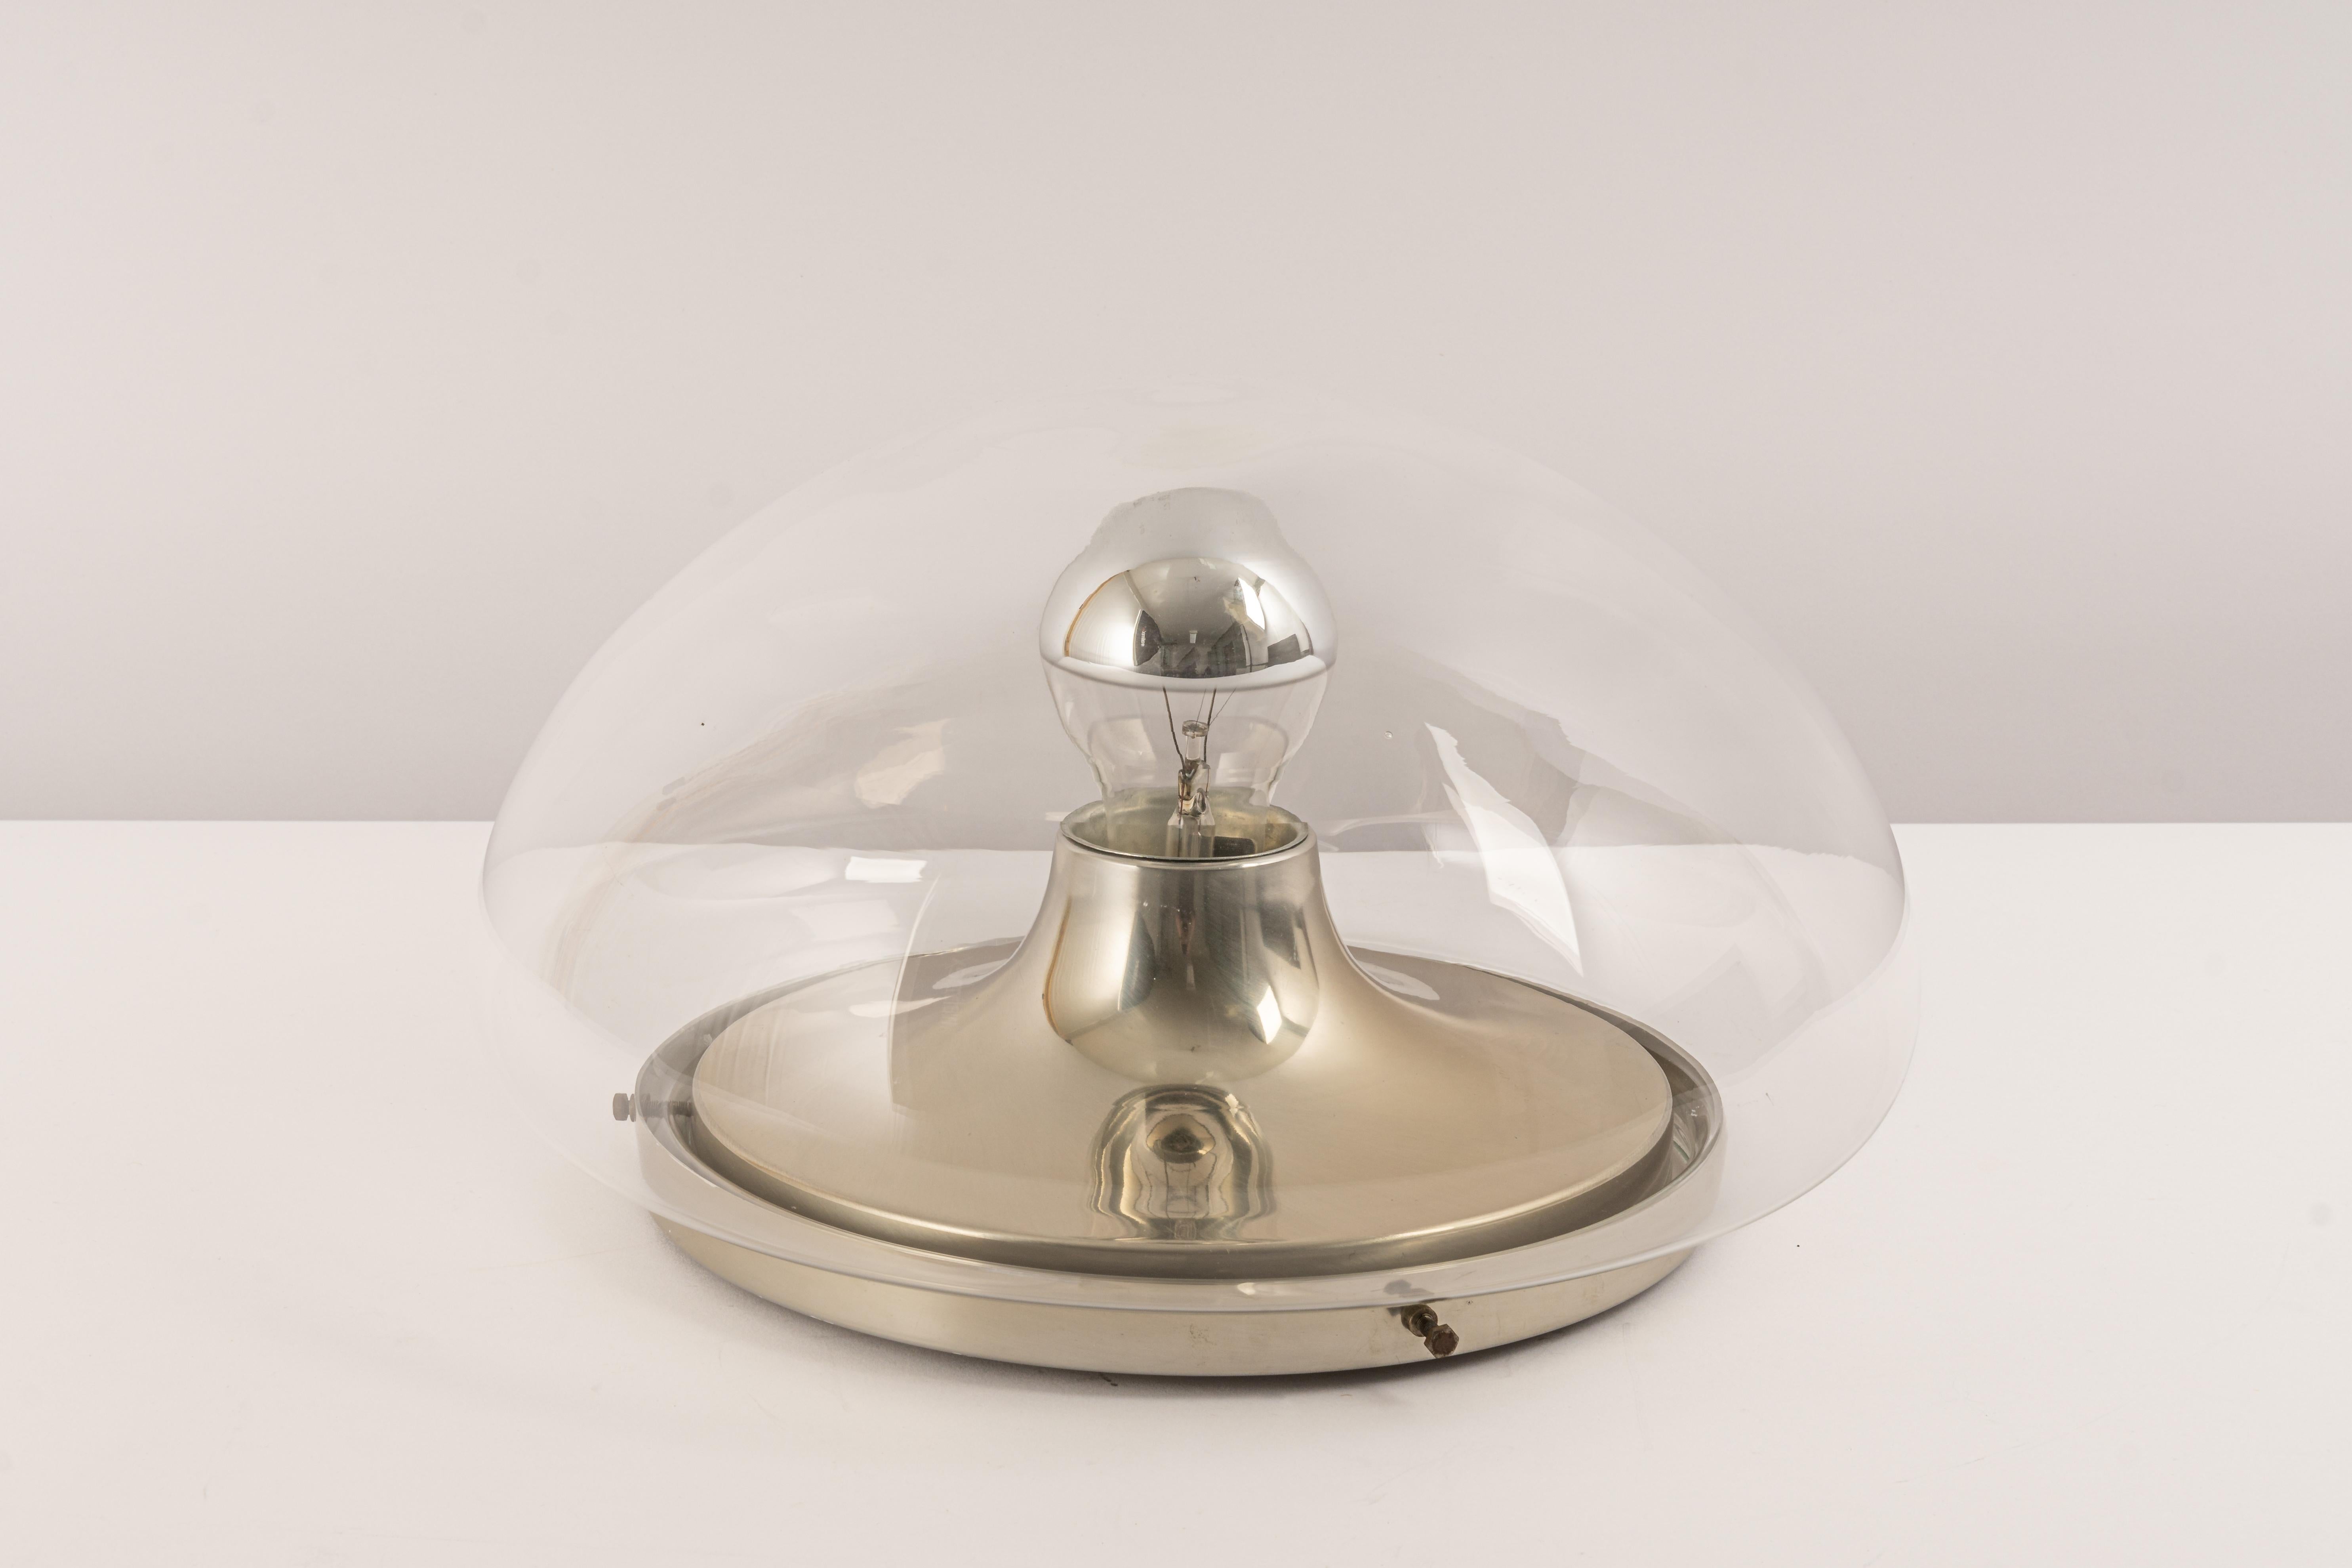 1 of 2 Vintage Sputnik lamps from the 1970s manufactured by Cosack, Germany, 1970s.
This lamp can be used as a ceiling lamp, or as a wall lamp.
Wonderful glass shape and light effect.
Sockets: 1 x E27 standard Bulb and function on voltage from